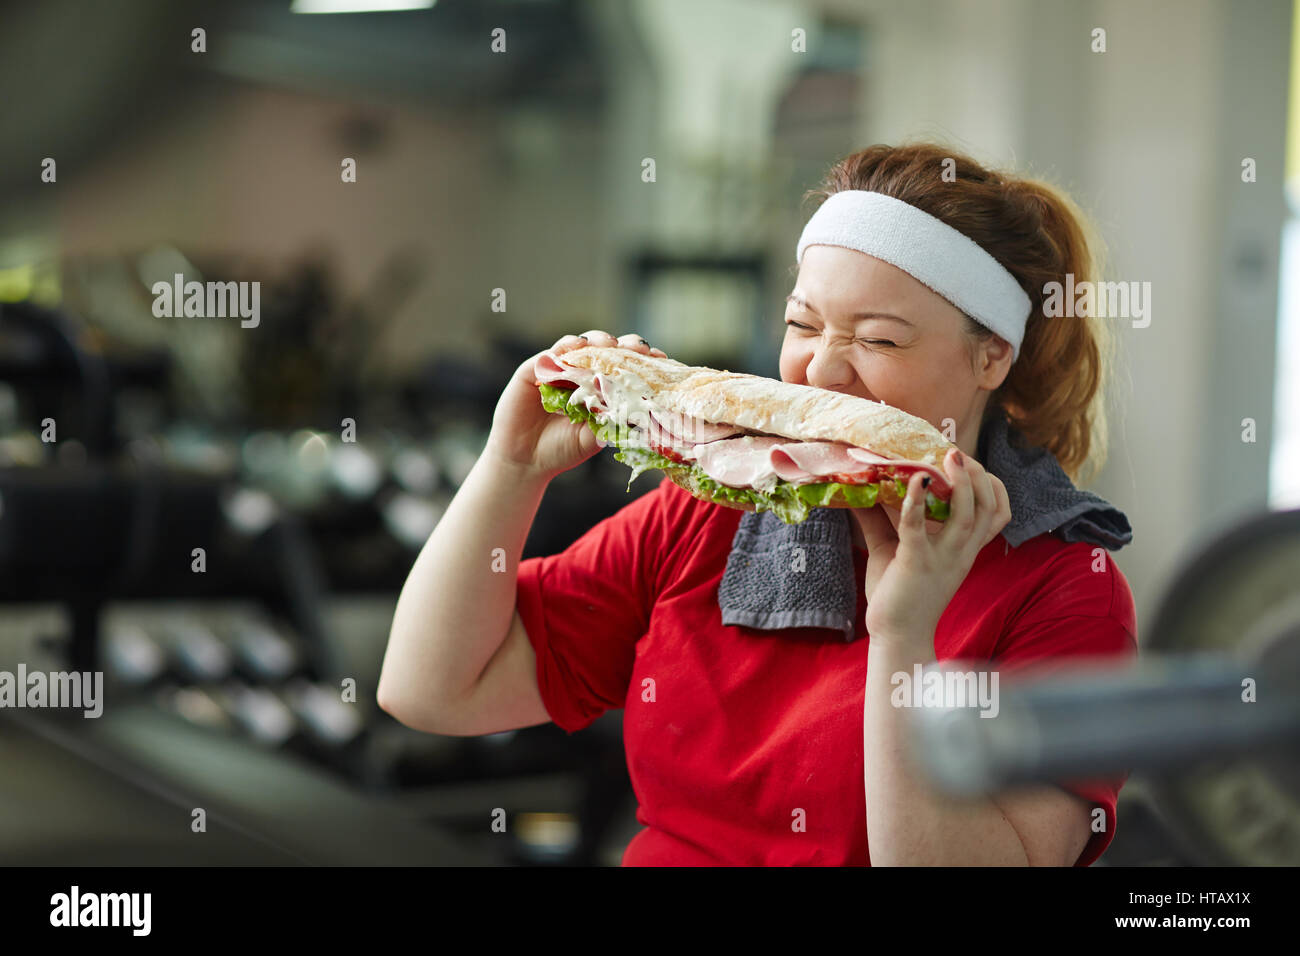 Portrait of young overweight woman eating big fattening sandwich taking a break from work out in gym, concept of food obsession Stock Photo